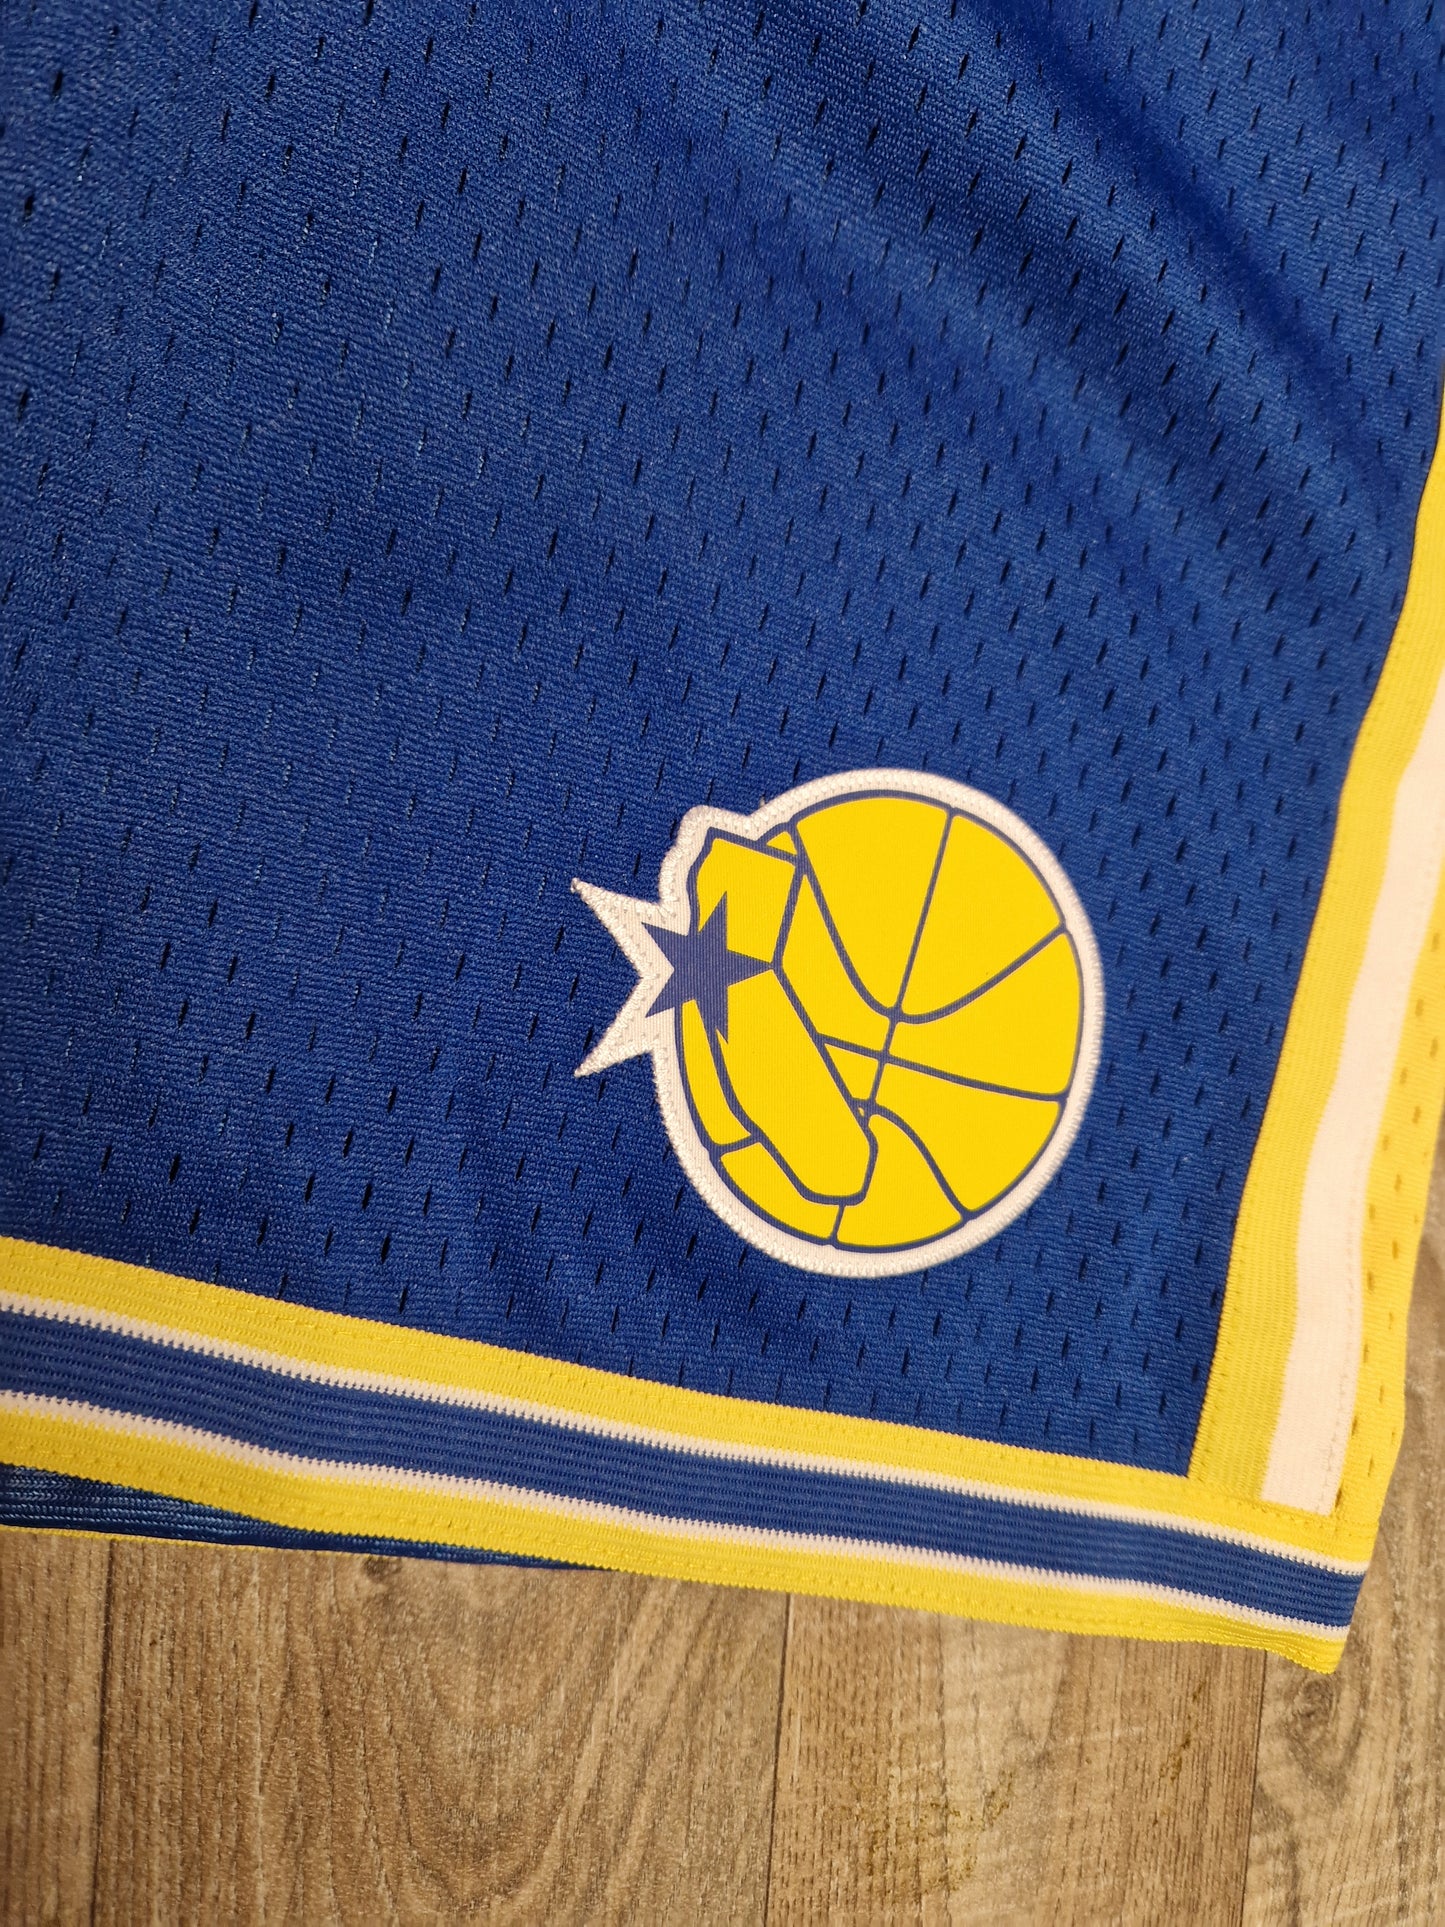 Golden State Warriors Shorts Size Small